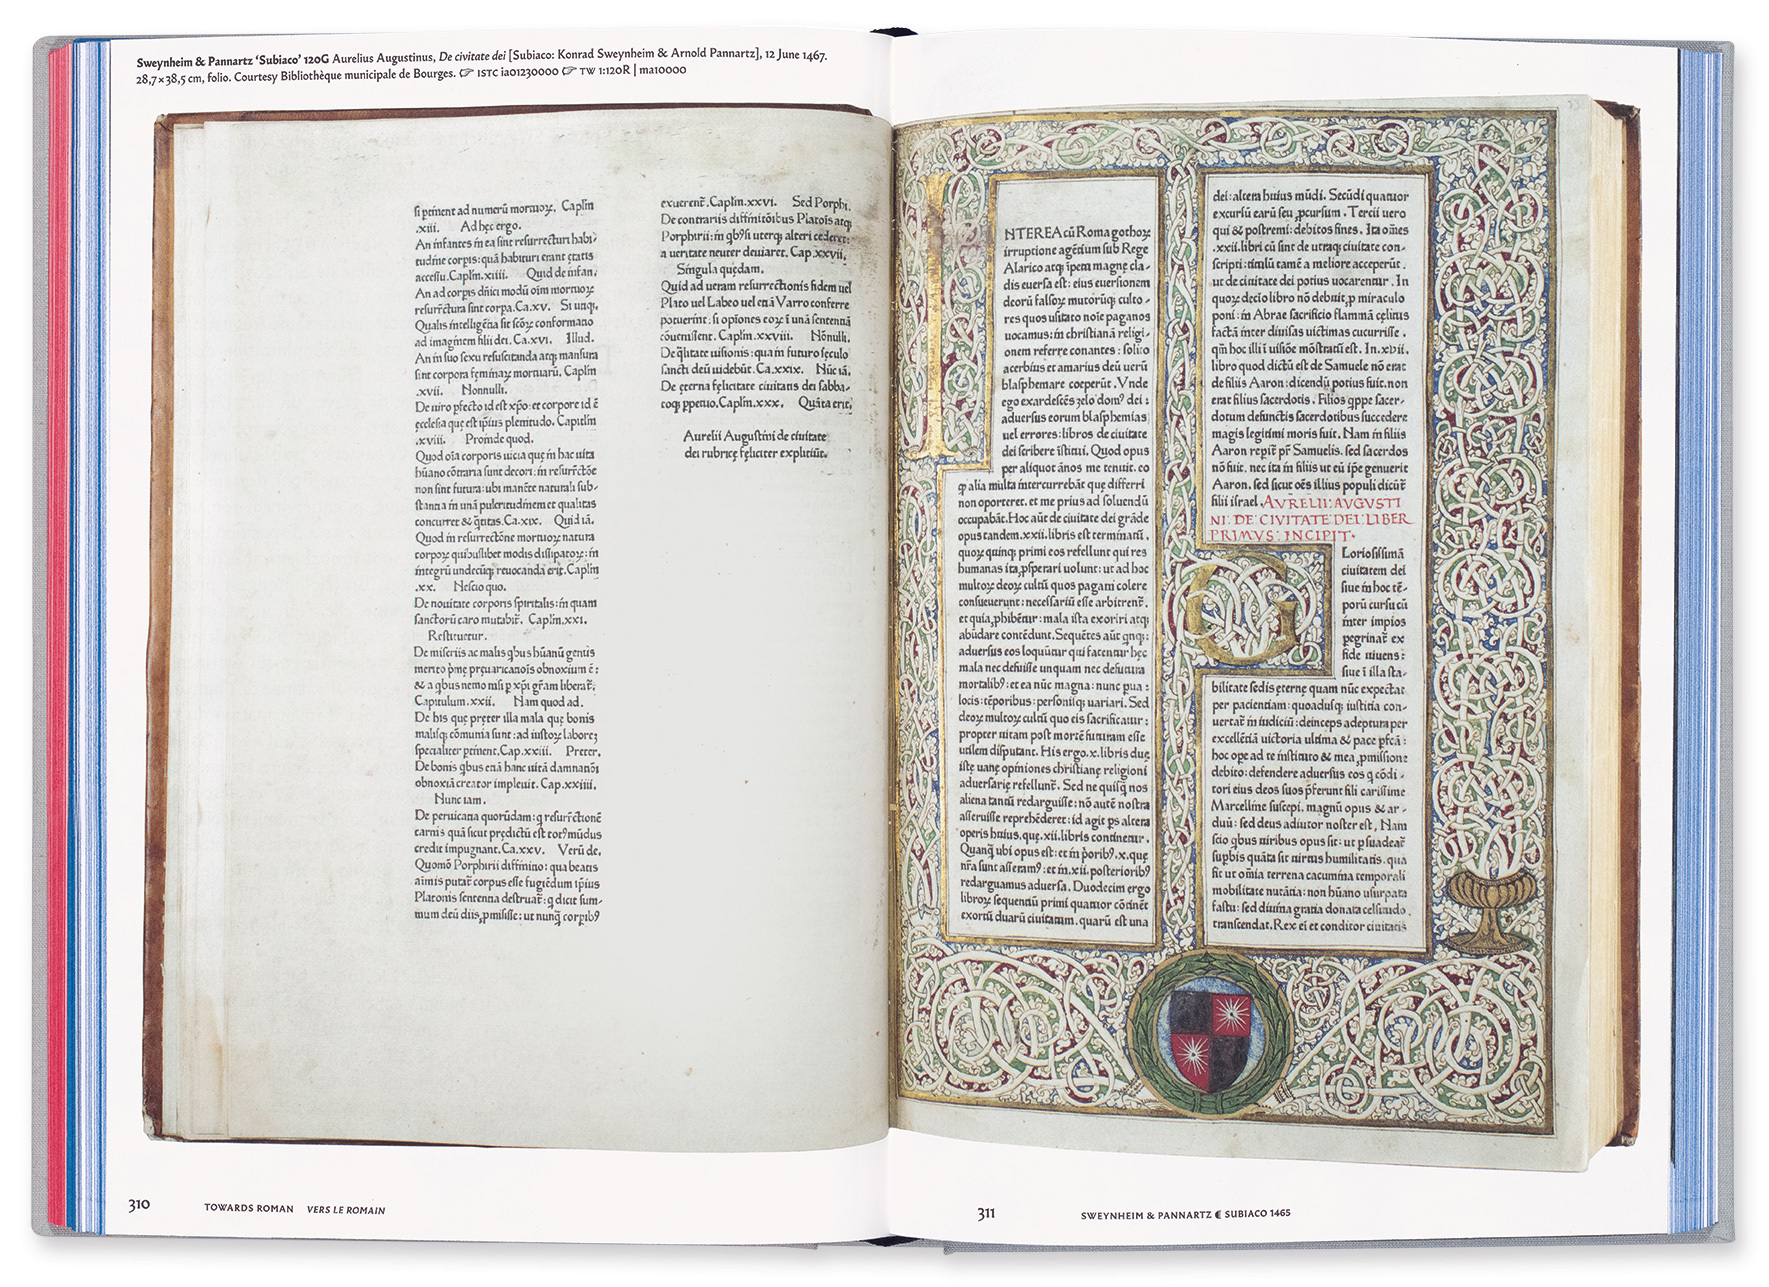 Spread from Gotico-Antiqua, Proto-Roman, Hybrid. Pages from a 1467 book designed and produced by Konrad Sweynheim and Arnold Pannartz, the printers and punchcutters who introduced letterpress printing to Italy and were the first to propose a post-gothic typeface – Subiaco.